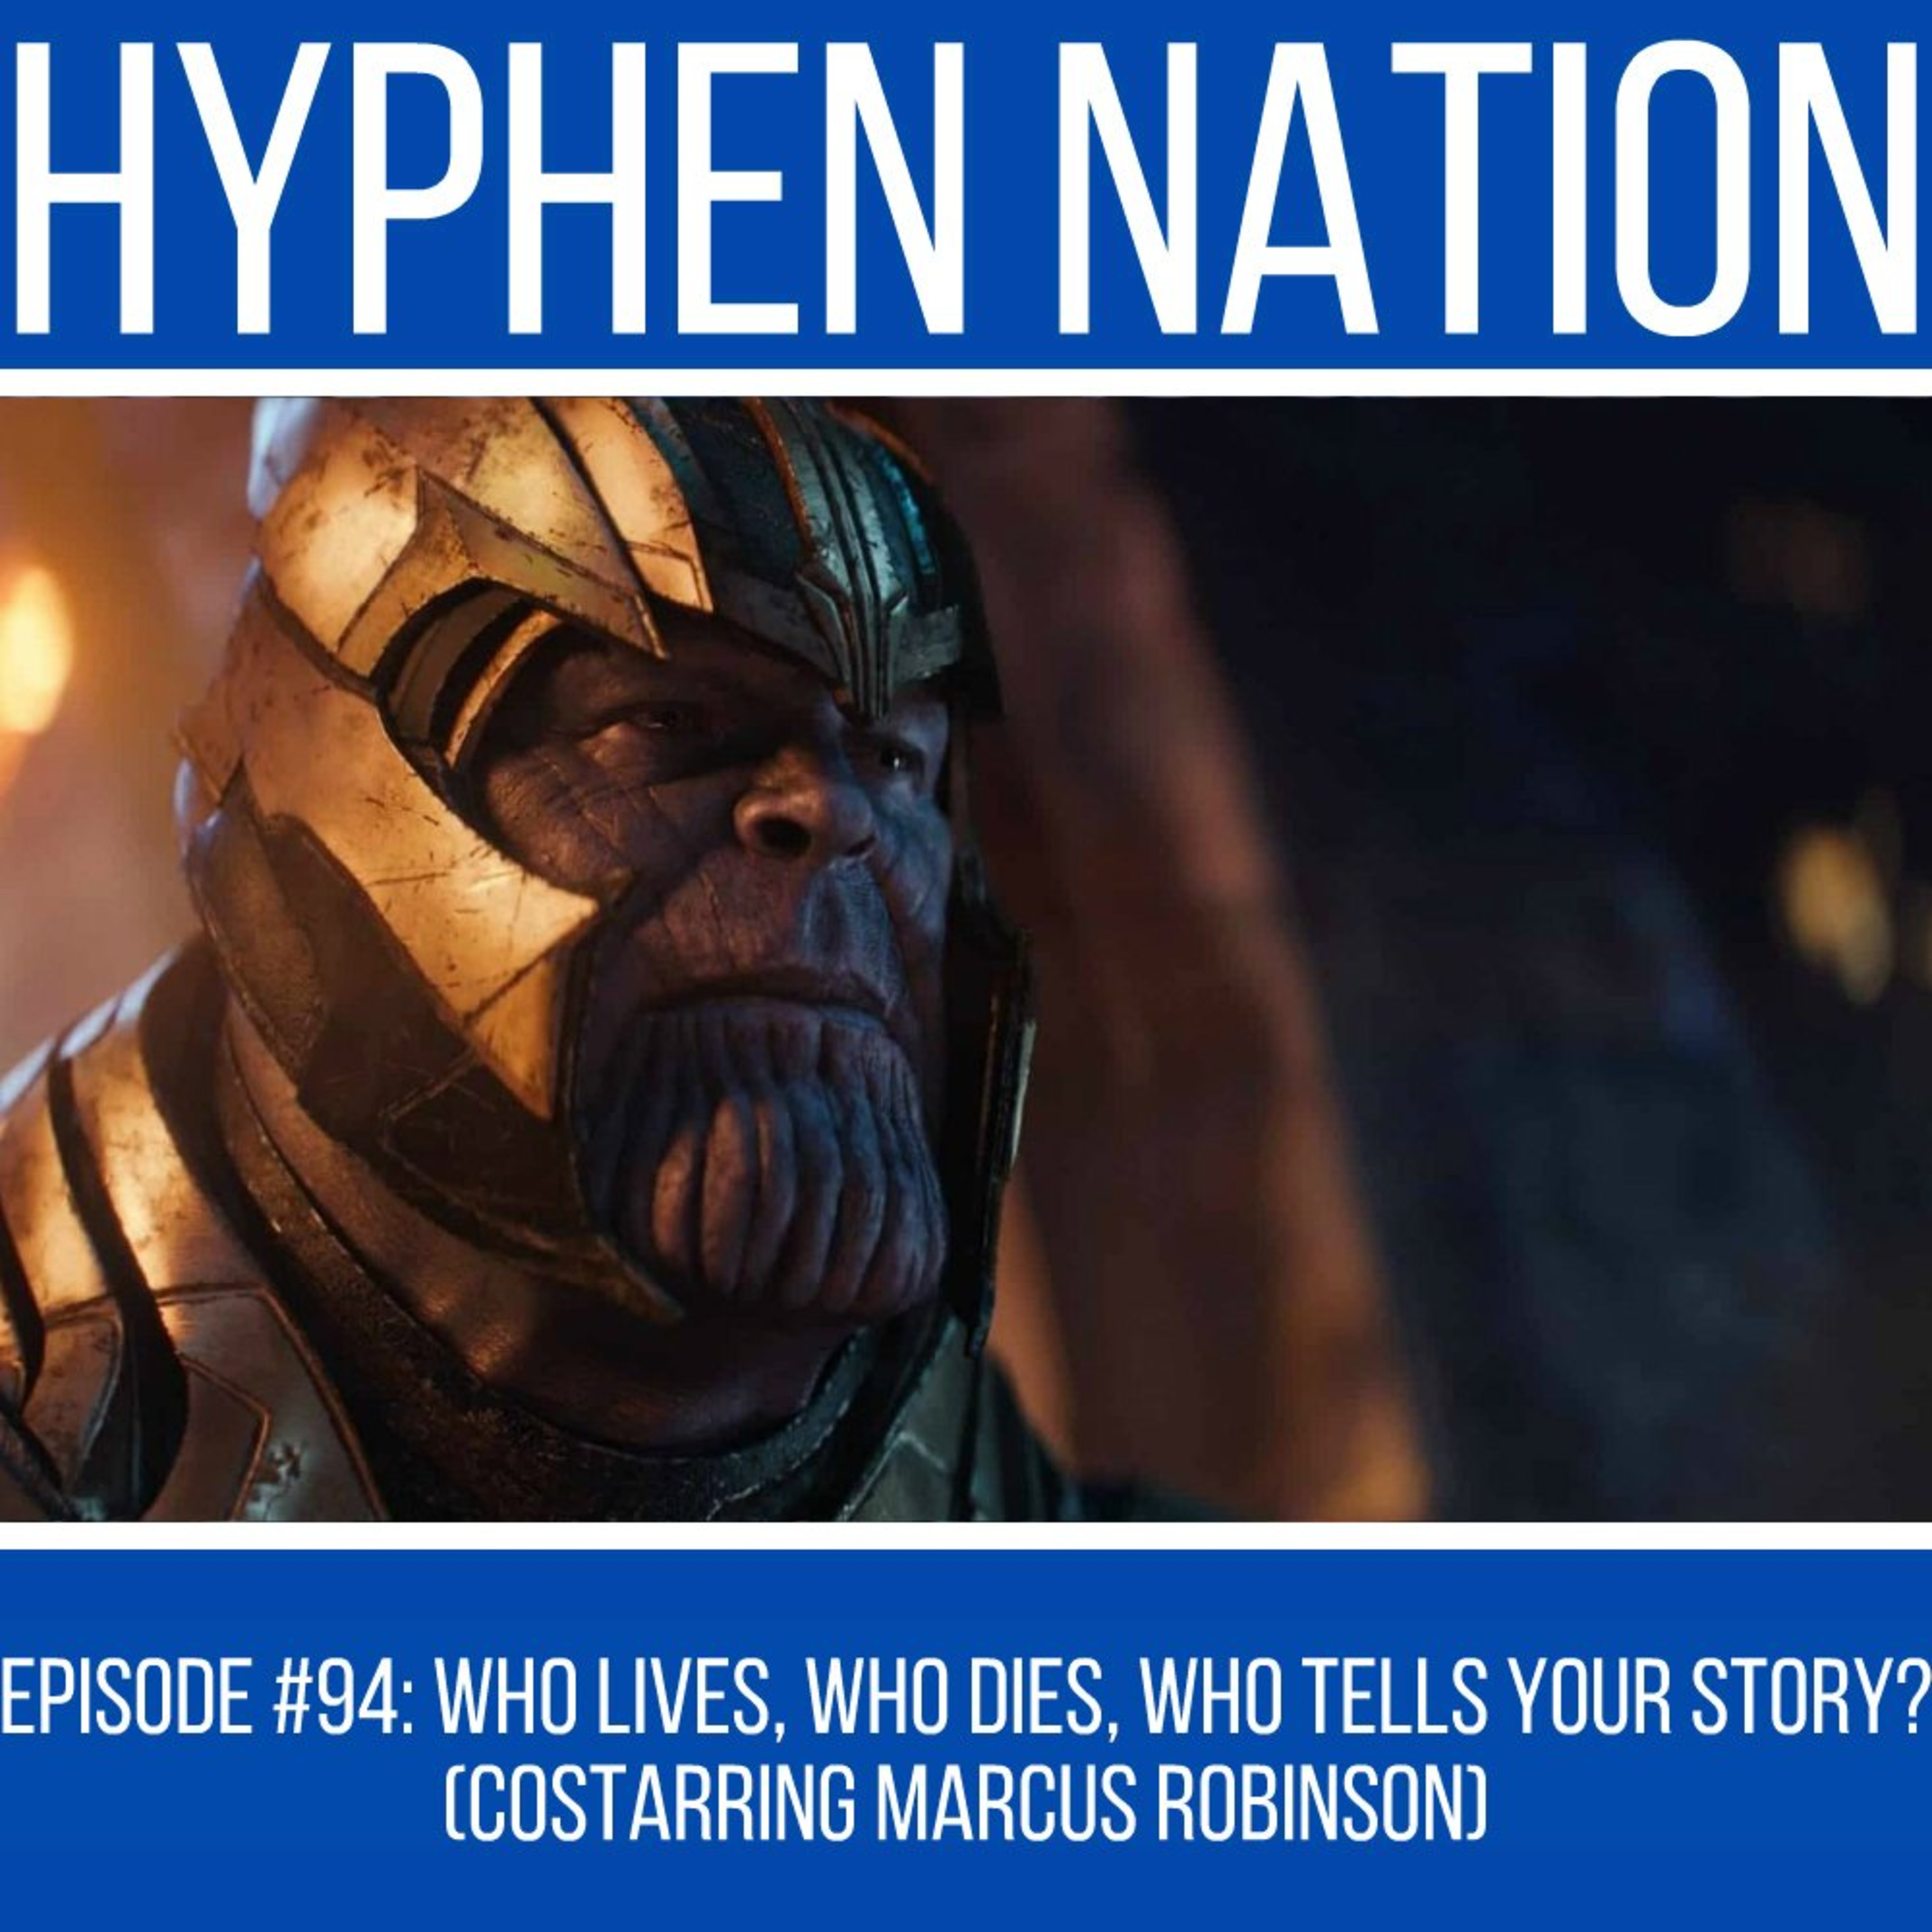 Episode #94: Who Lives, Who Dies, Who Tells Your Story? (Costarring Marcus Robinson)